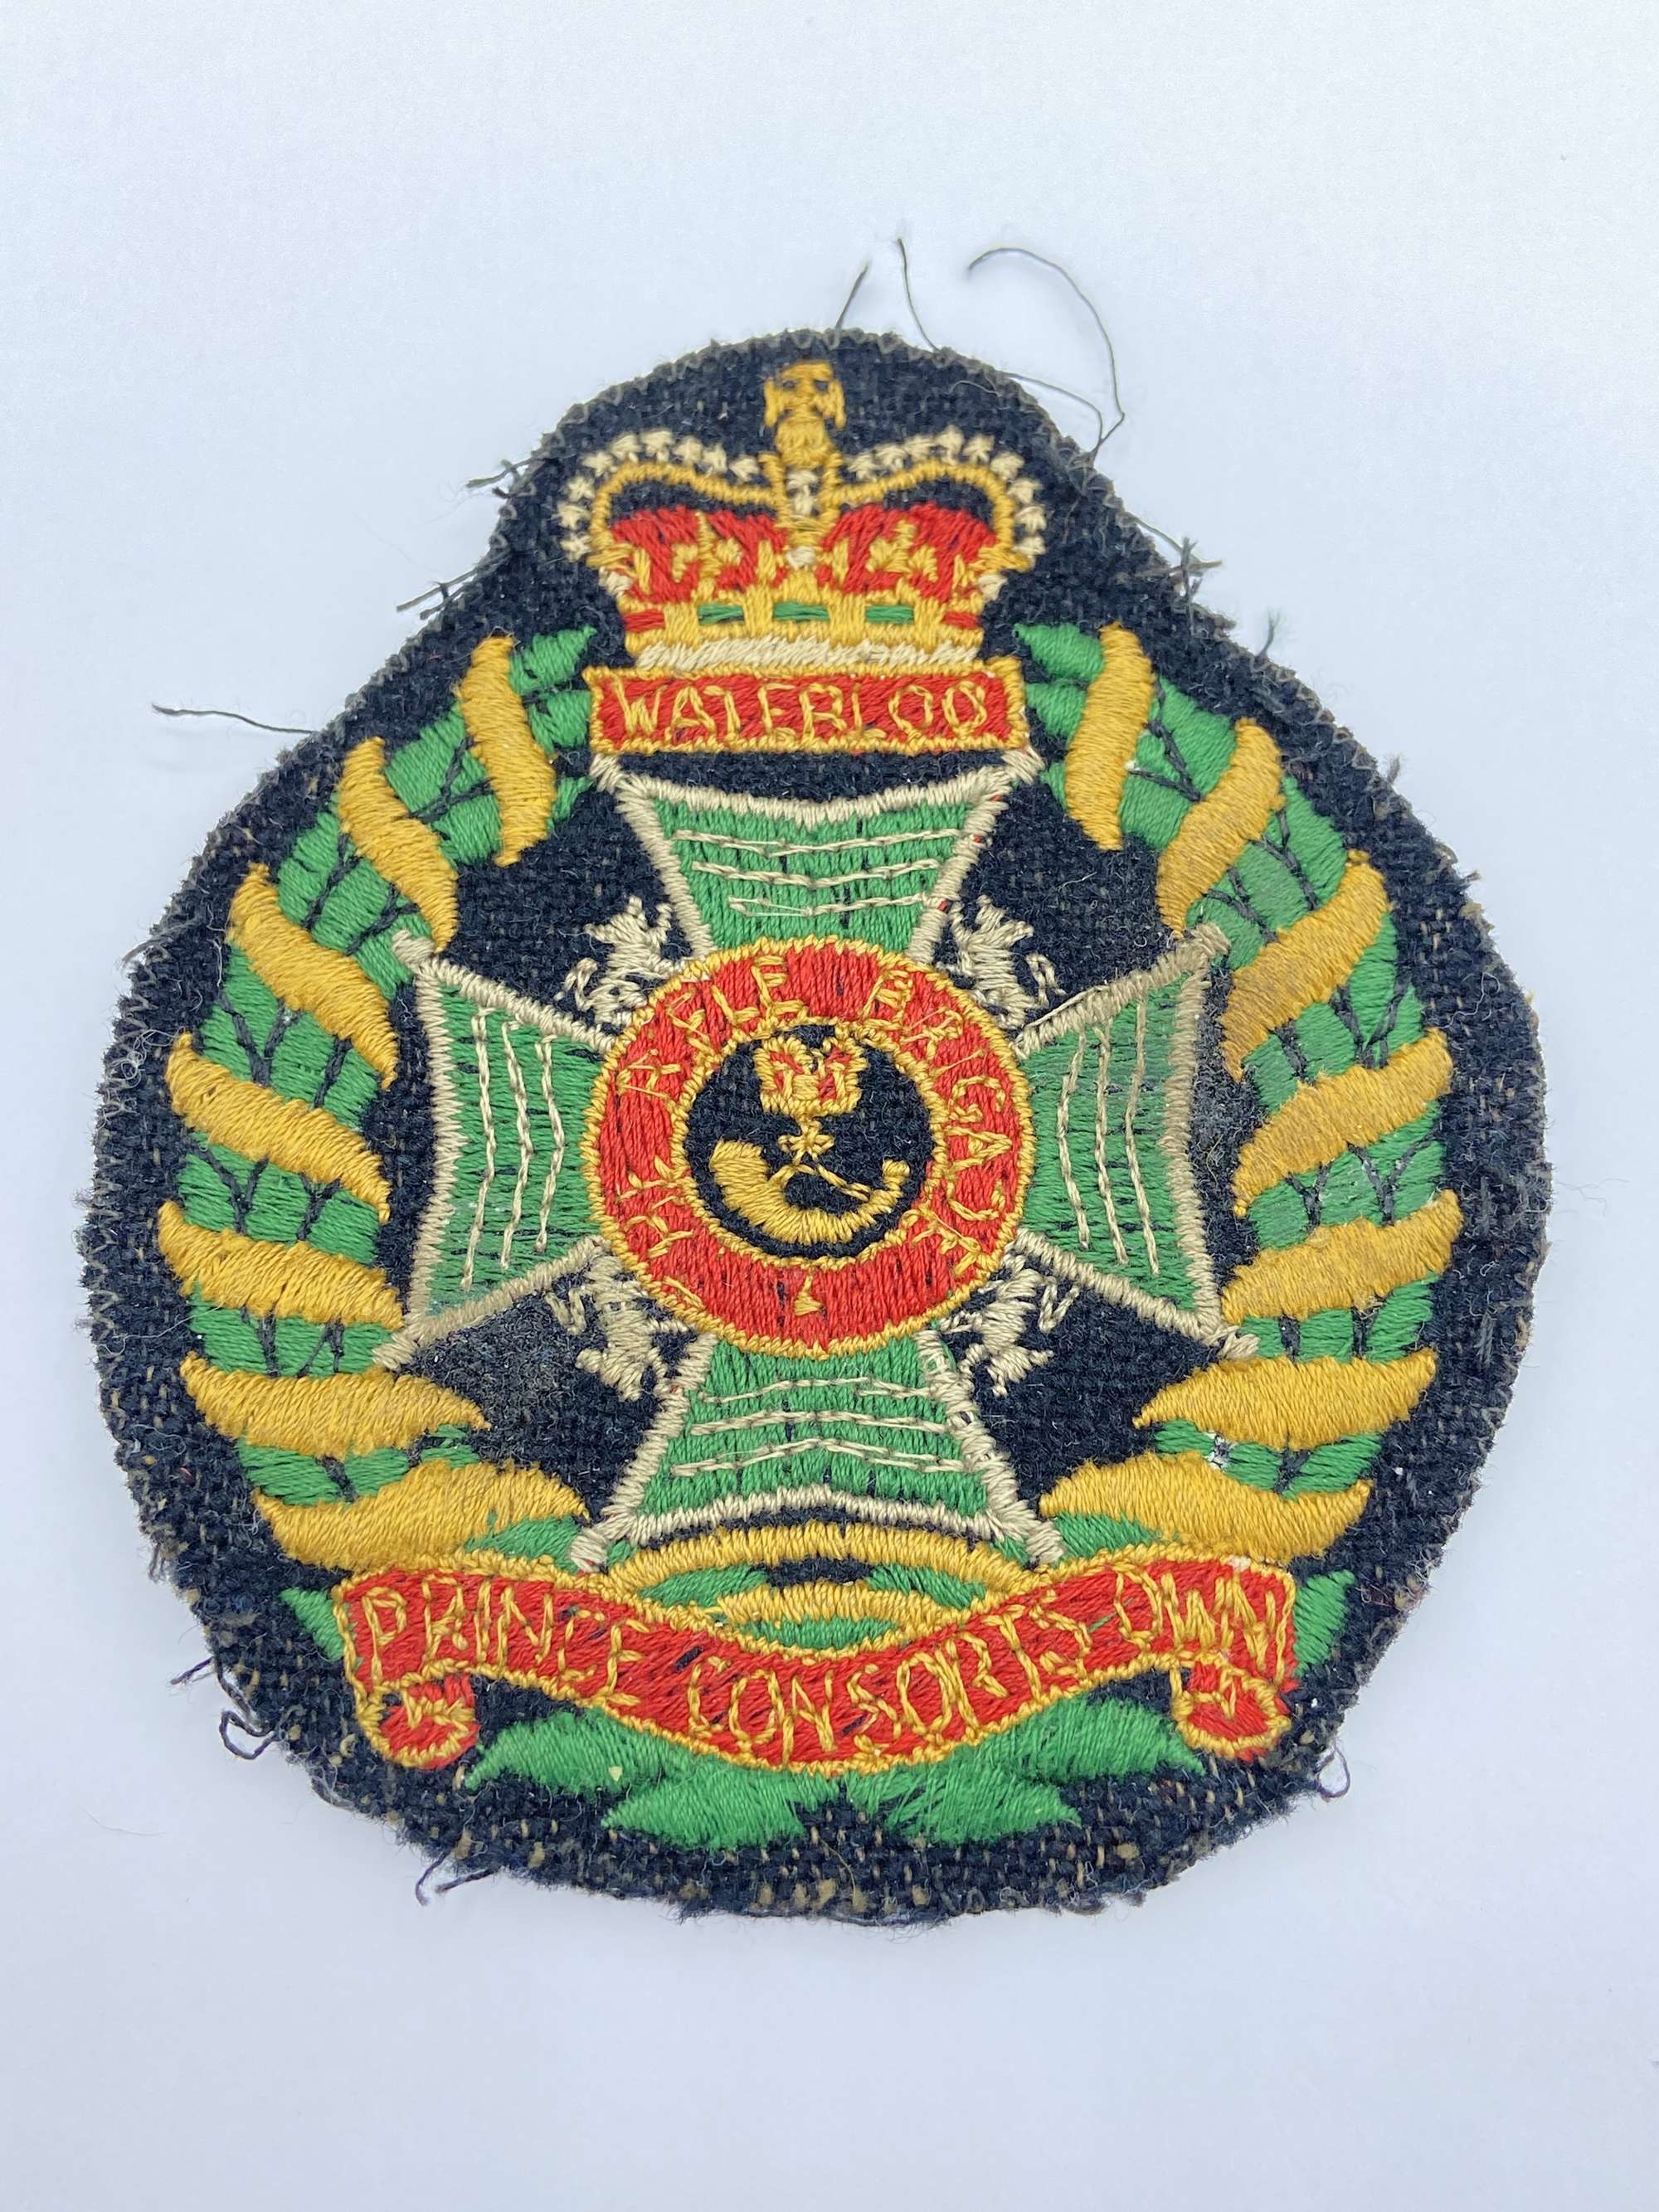 Post WW2 British Army Rifle Brigade (The Prince Consort's Own) Patch